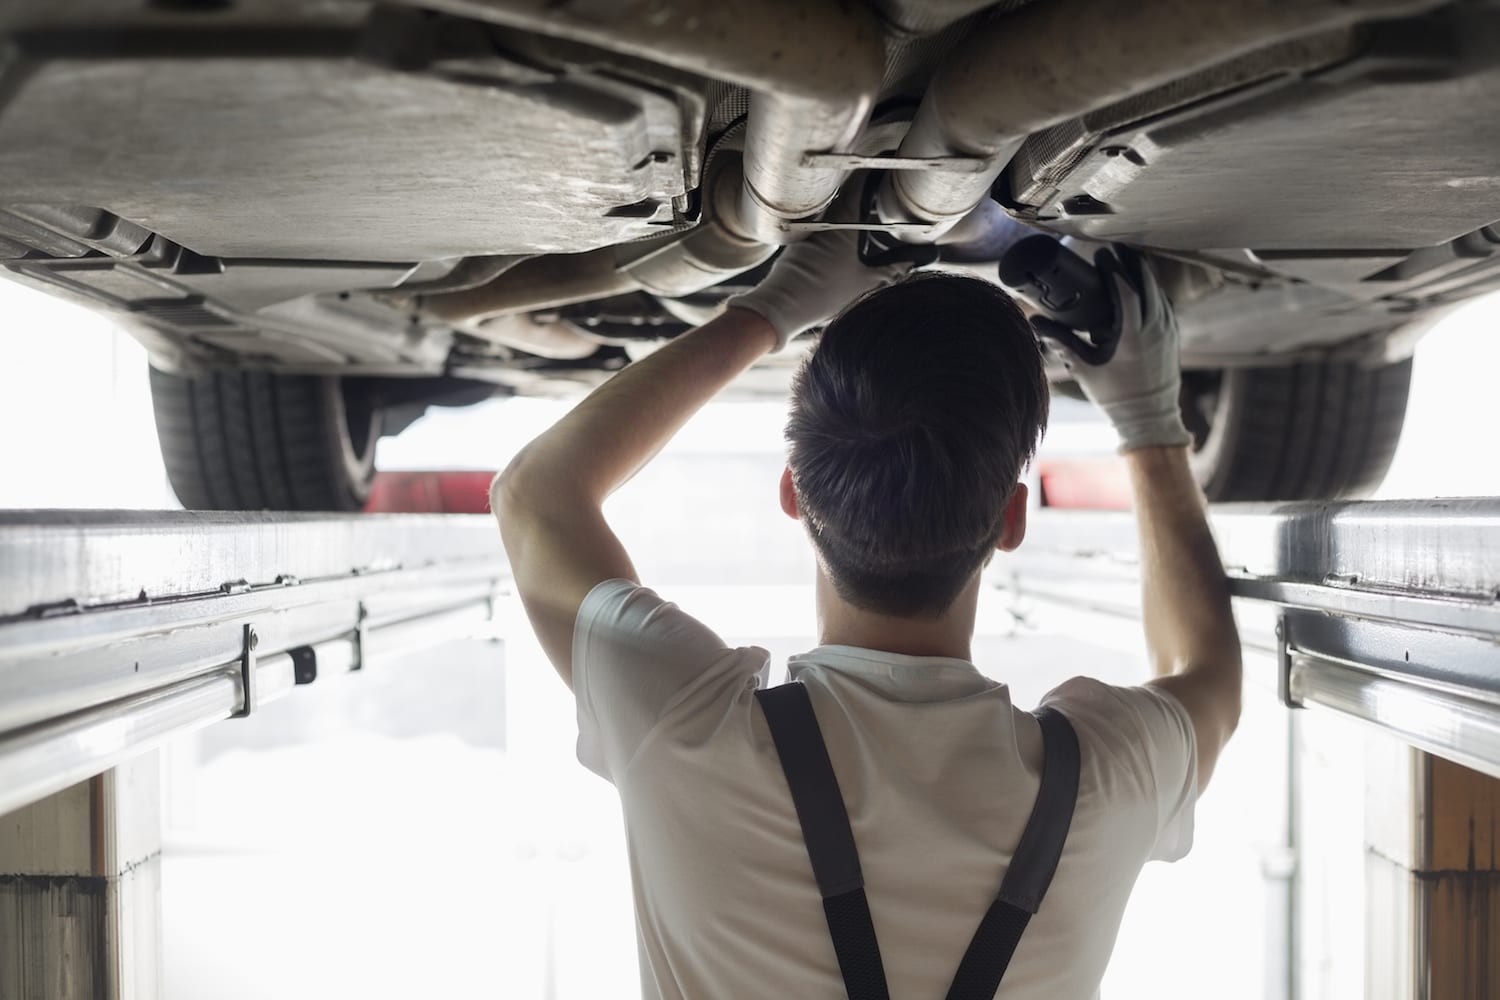 Many MOT failures could be avoided by simple checks